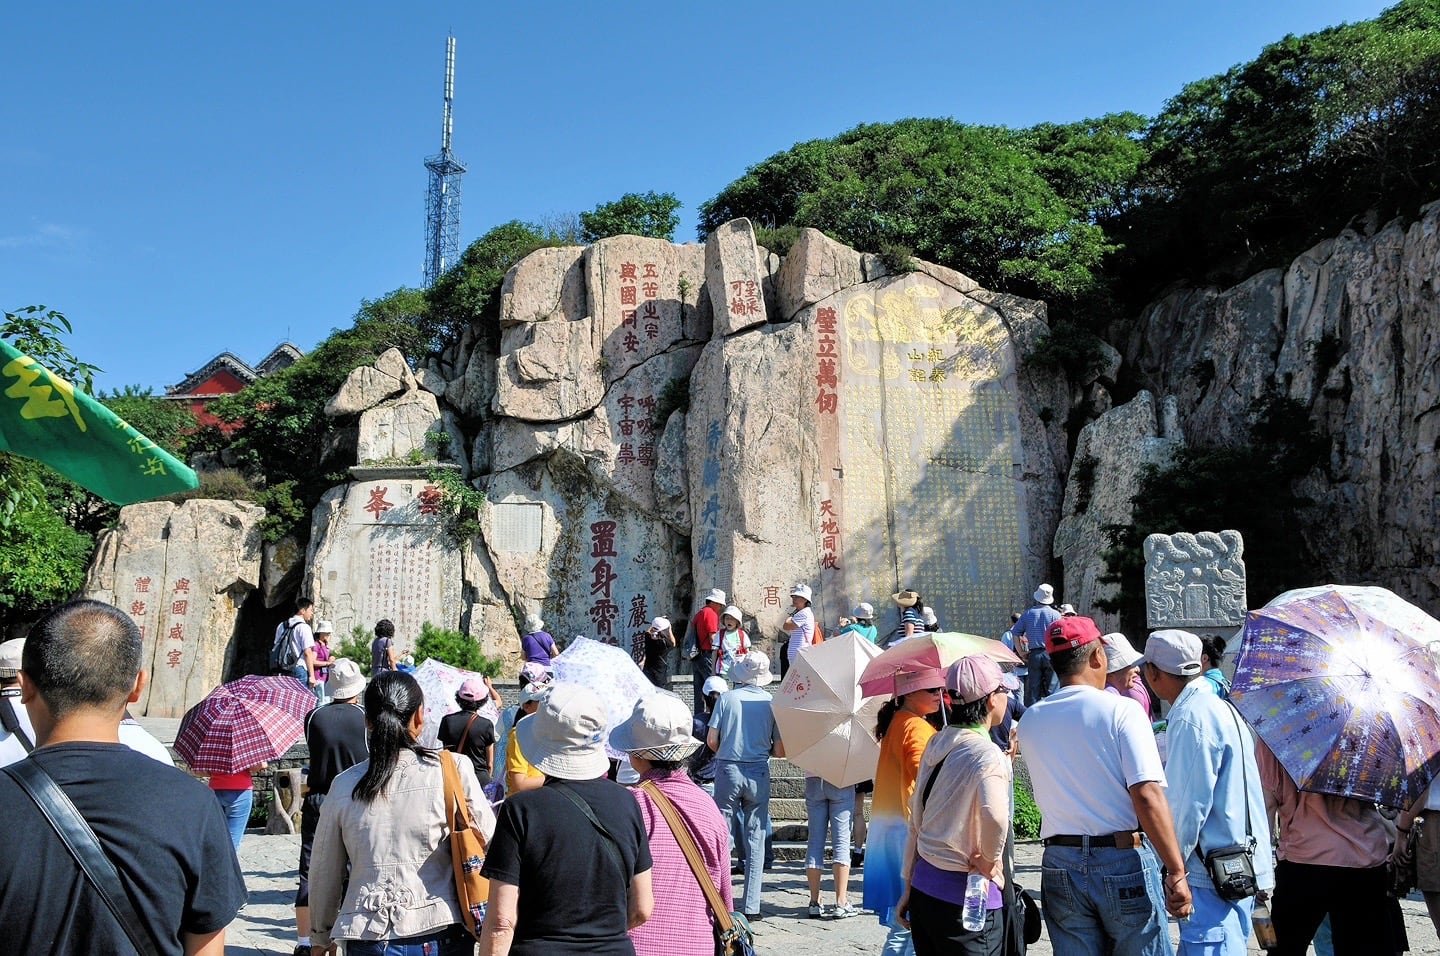 crowds in front of large stone slabs with Chinese inscription